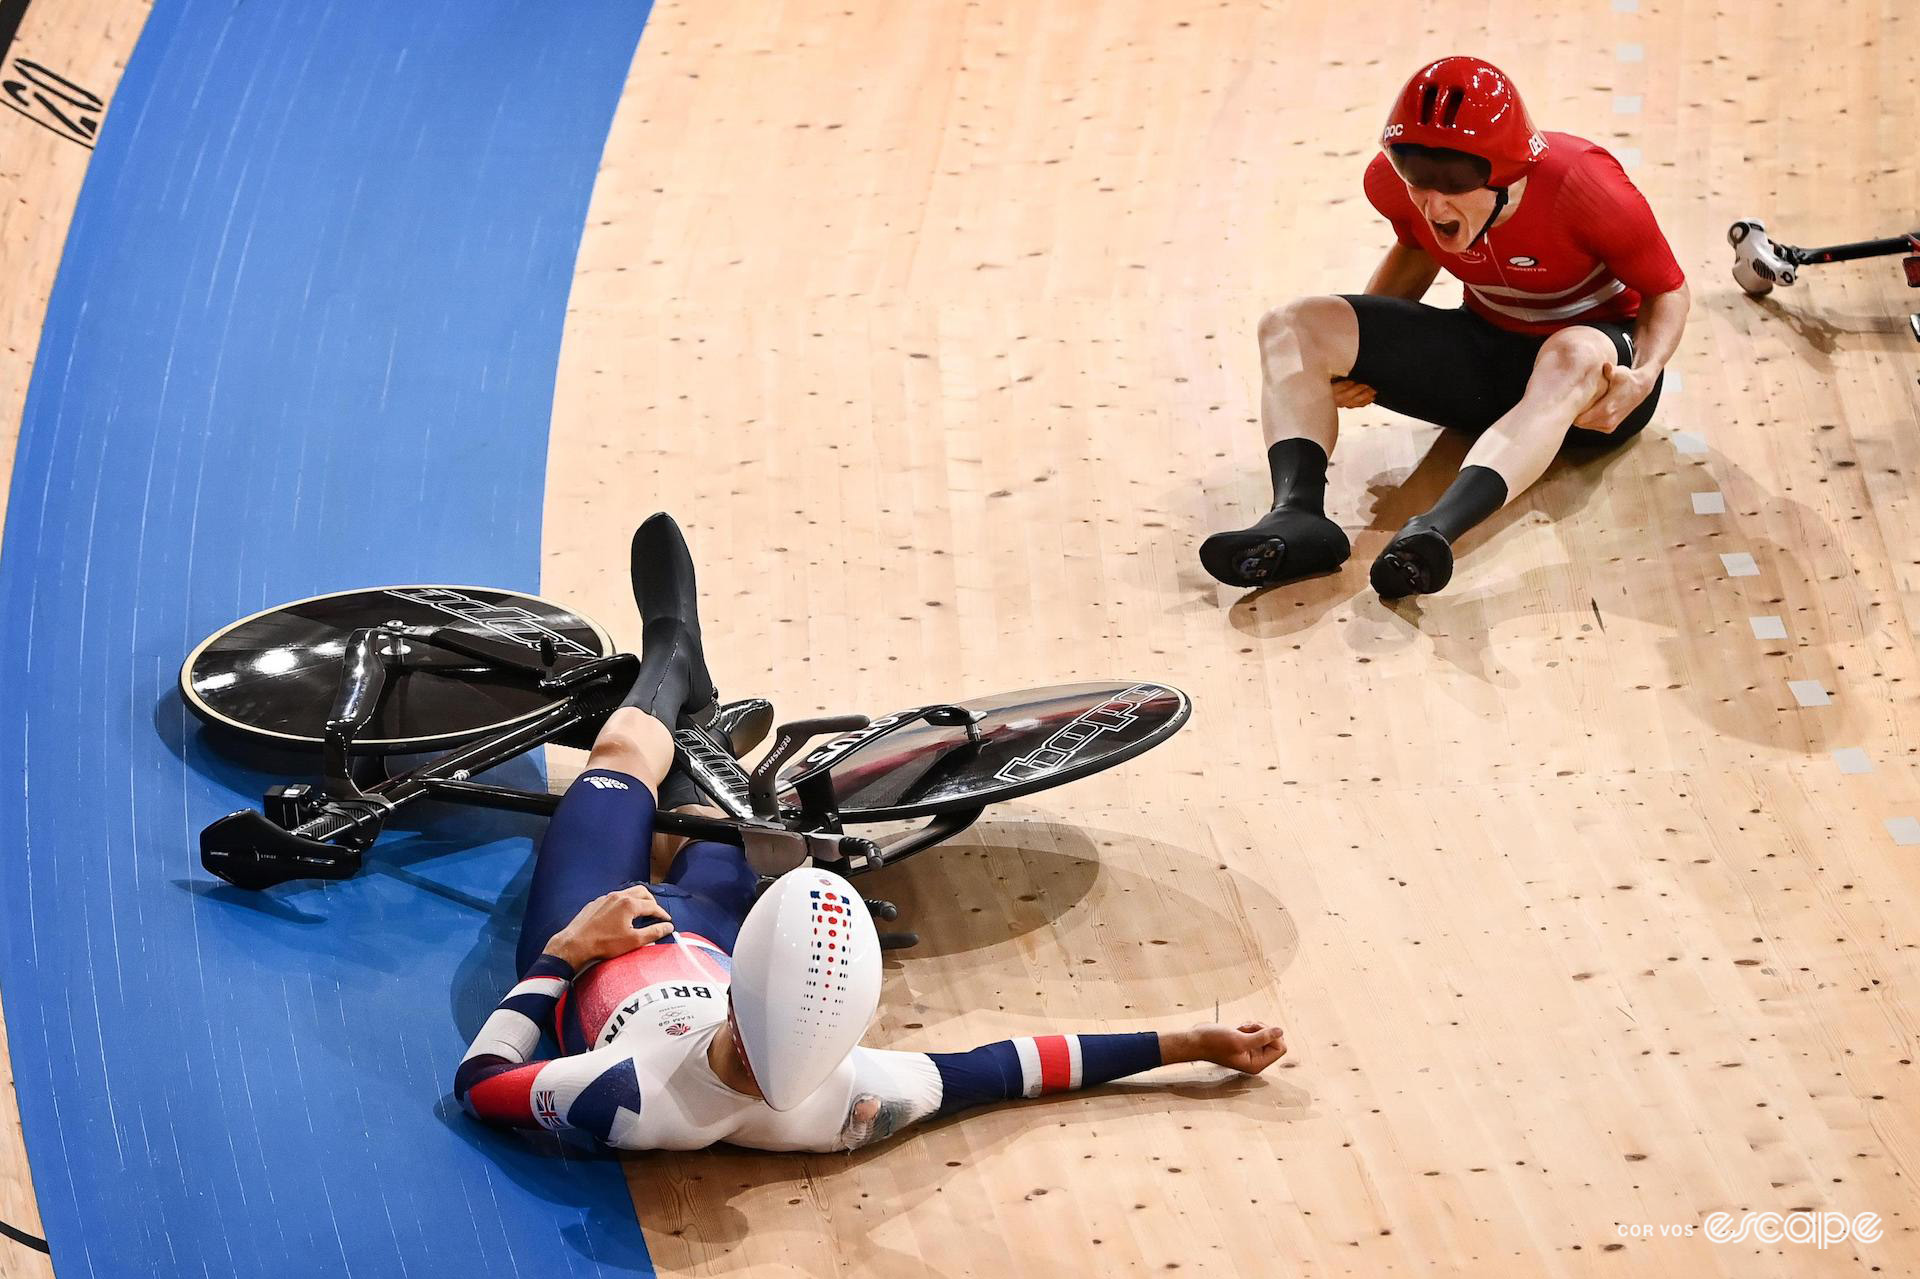 Charlie Tanfield of Great Britain and Fredrik Rodenberg of Denmark immediately after crashing during the Team Pursuit track event at the Tokyo Olympics.